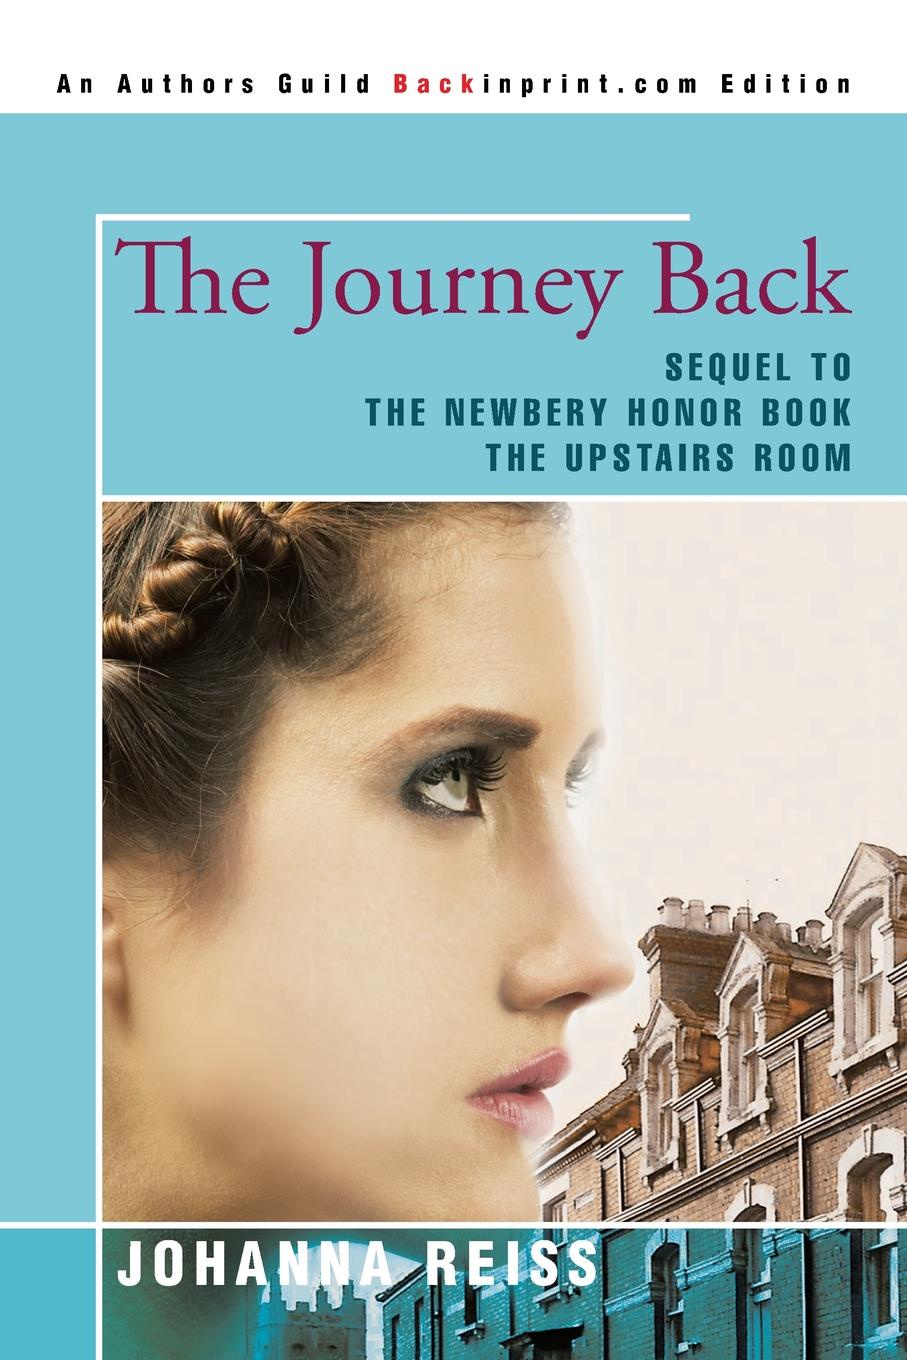 Back journey. The Journey back. Upstairs Room by Johanna Reiss. Sequel - back (2007).